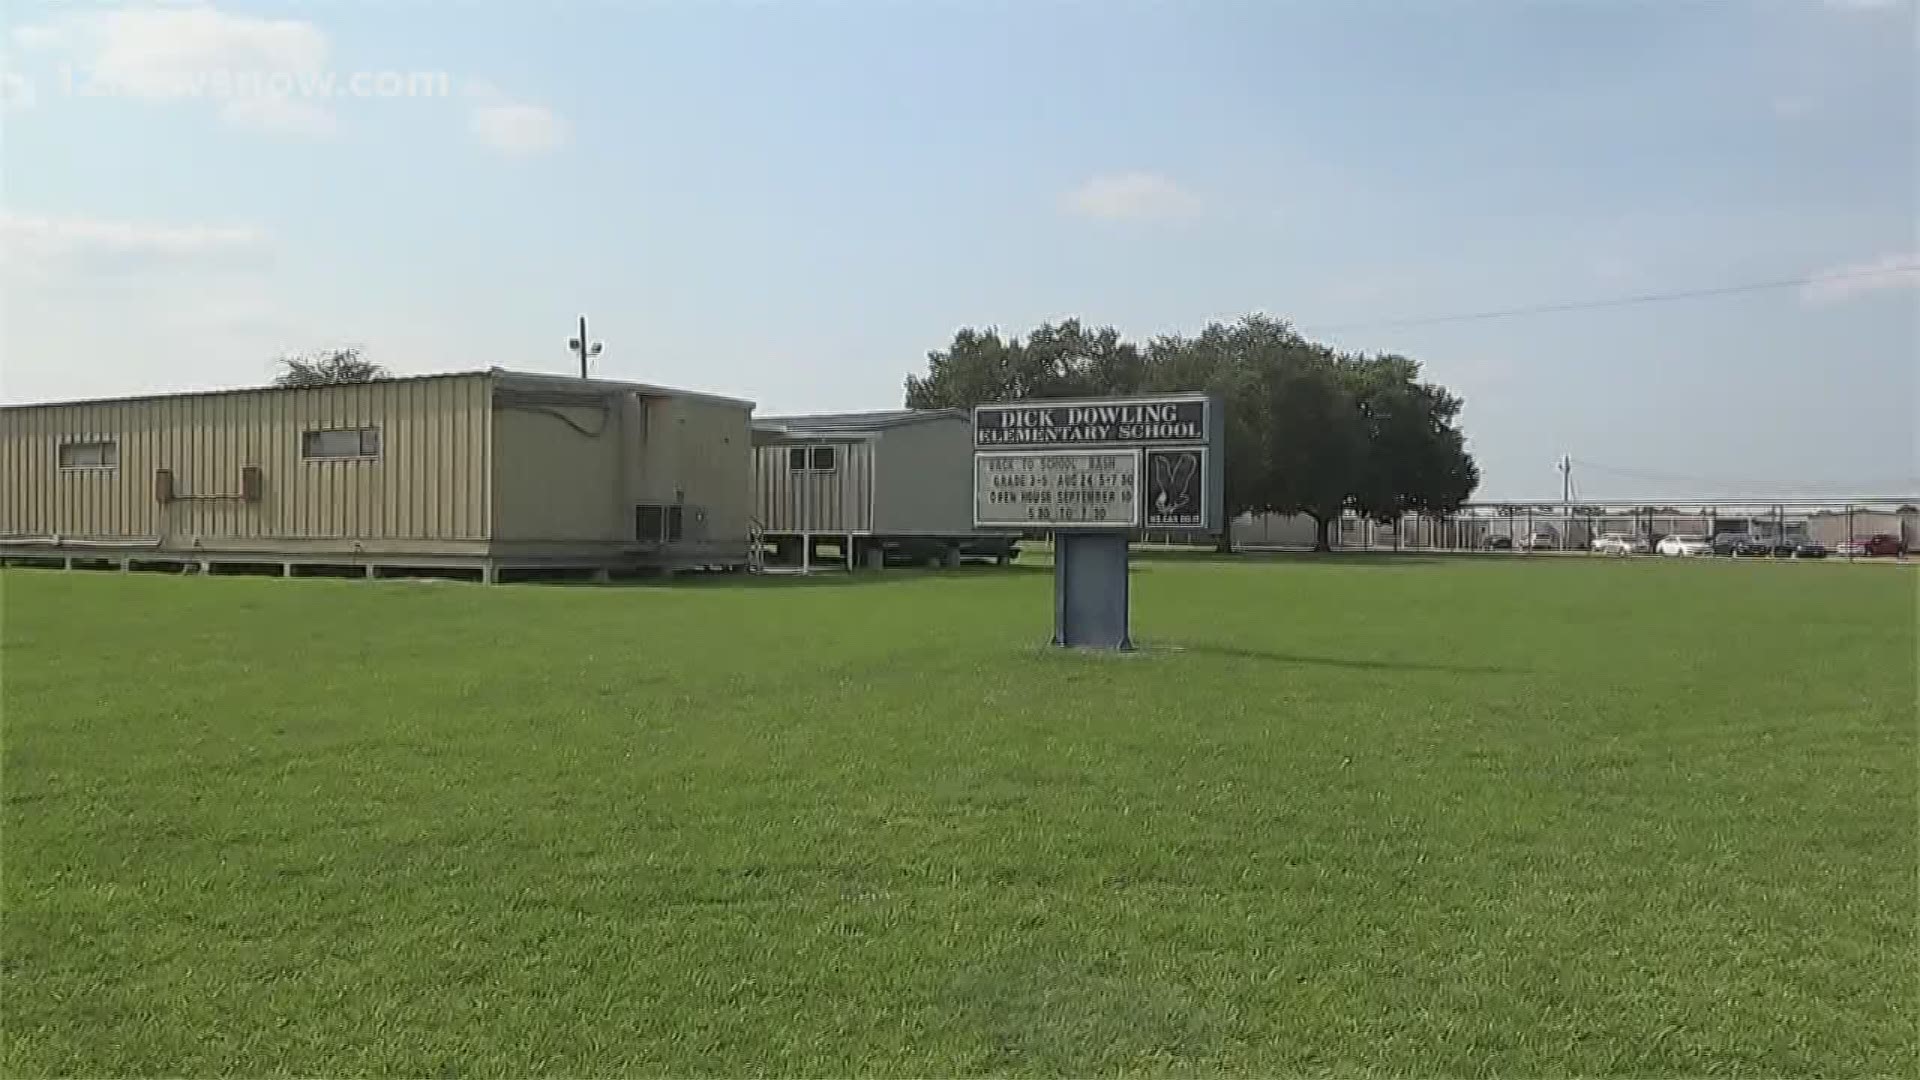 The Port Arthur Independent School District school board voted 5 to 3 to change the name Dick Dowling Elementary to Port Acres Elementary and 7 to 1 to change Robert E. Lee Elementary to Lakeview Elementary.